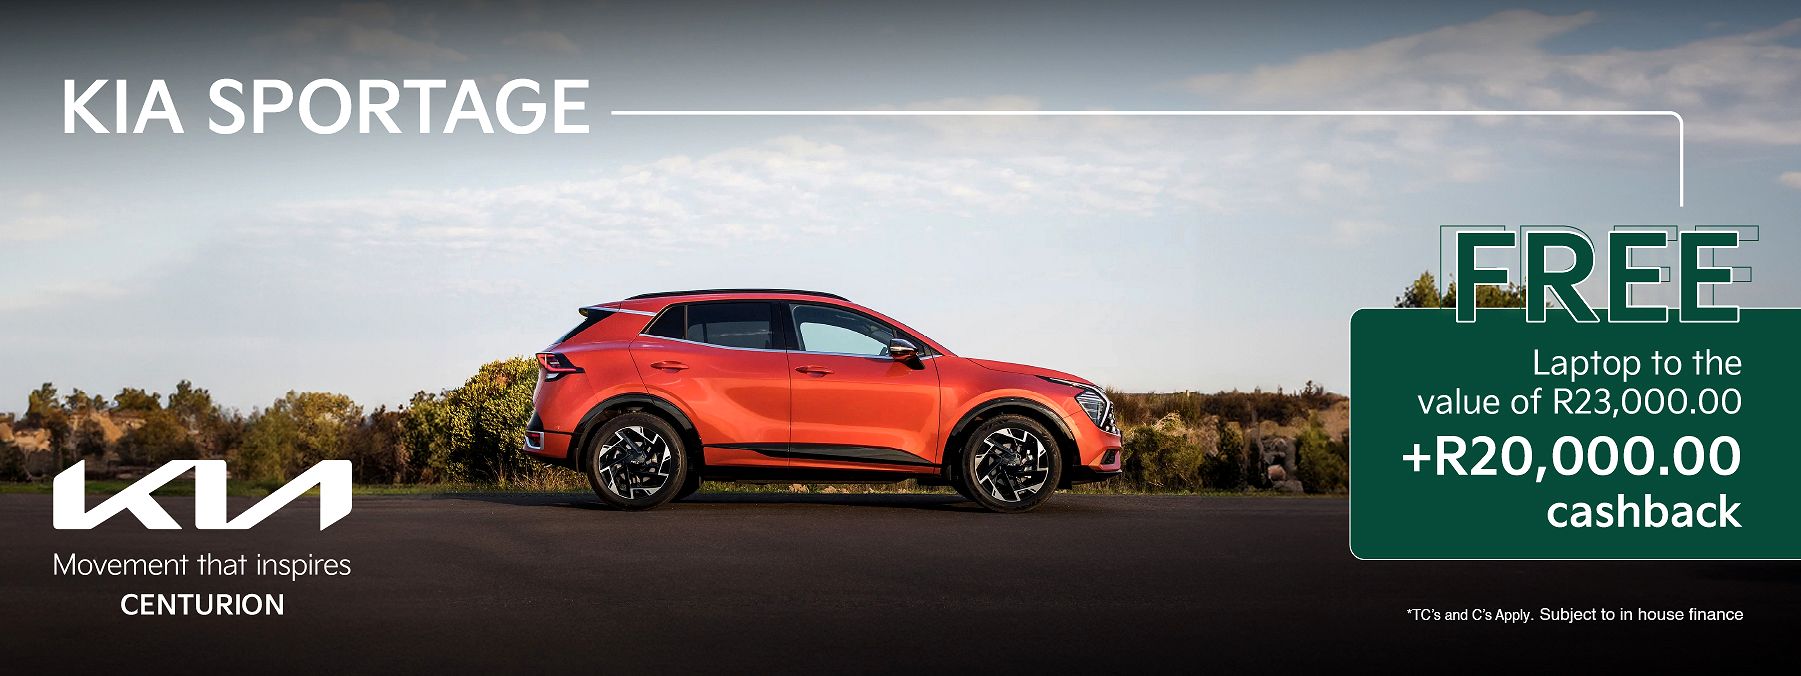 Sportage - Free Laptop to the value of R23,000.00 + R20,000.00 cashback